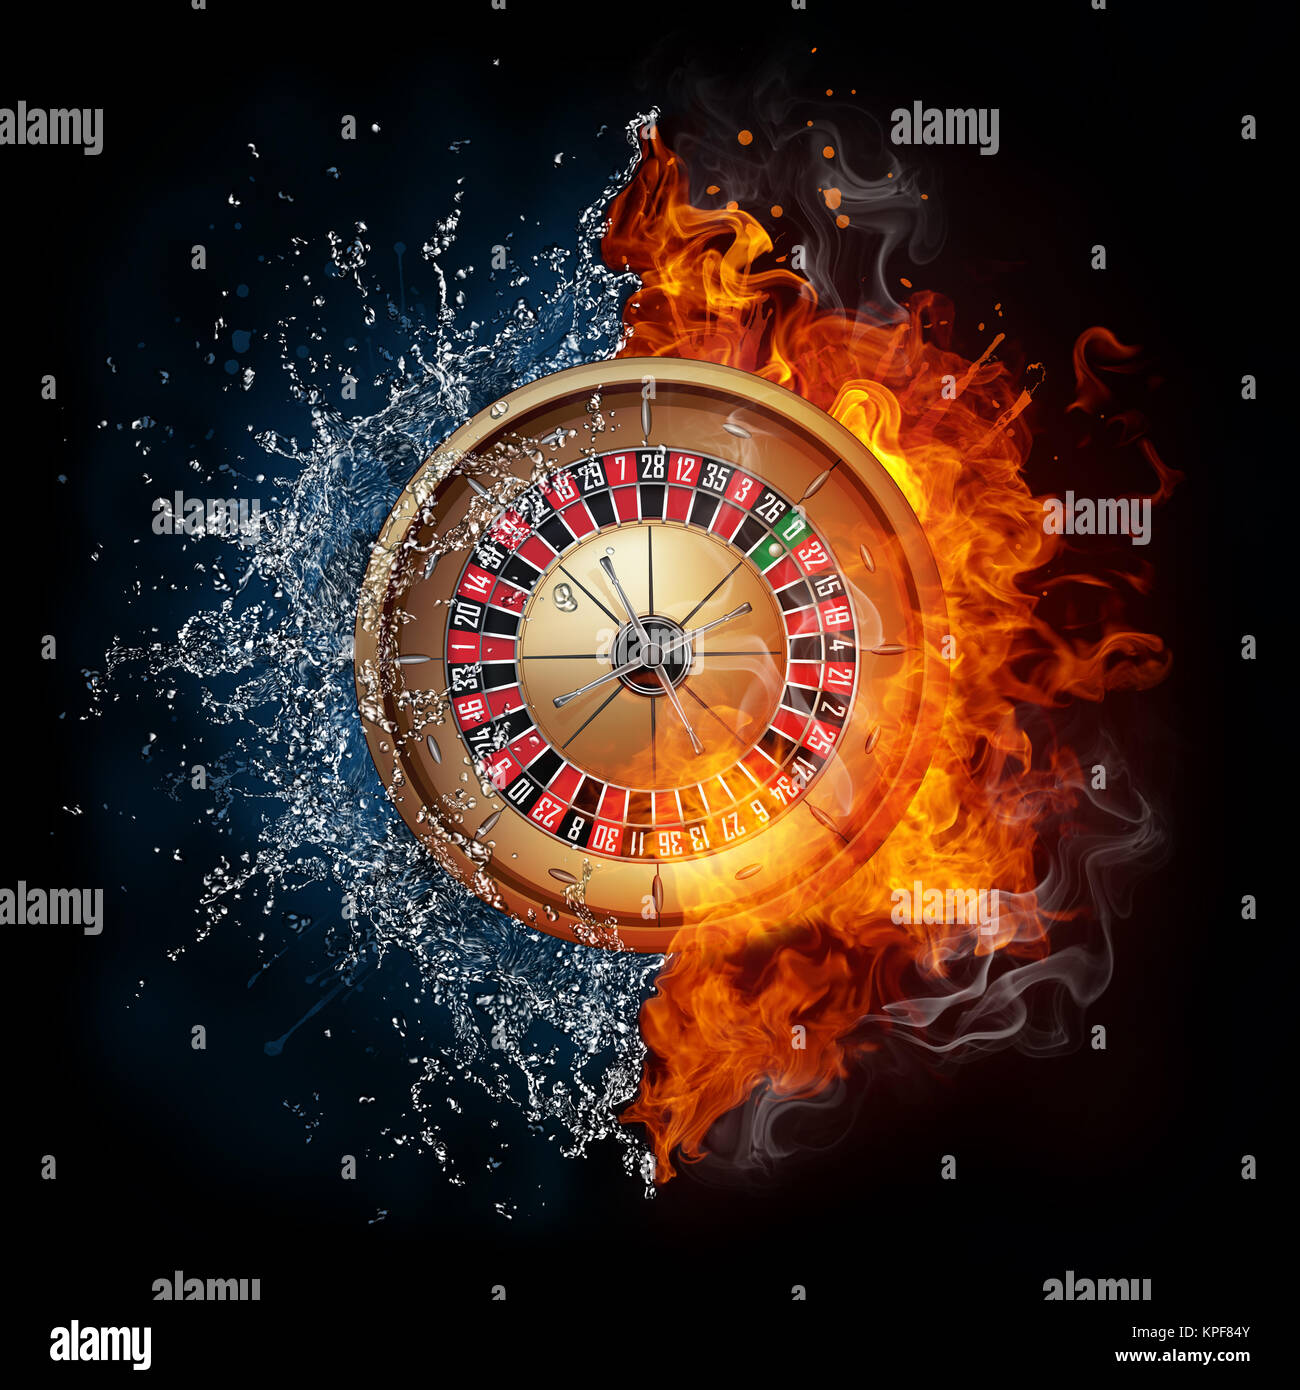 Casino Roulette in Water and Fire Isolated on Black Background Stock Photo  - Alamy